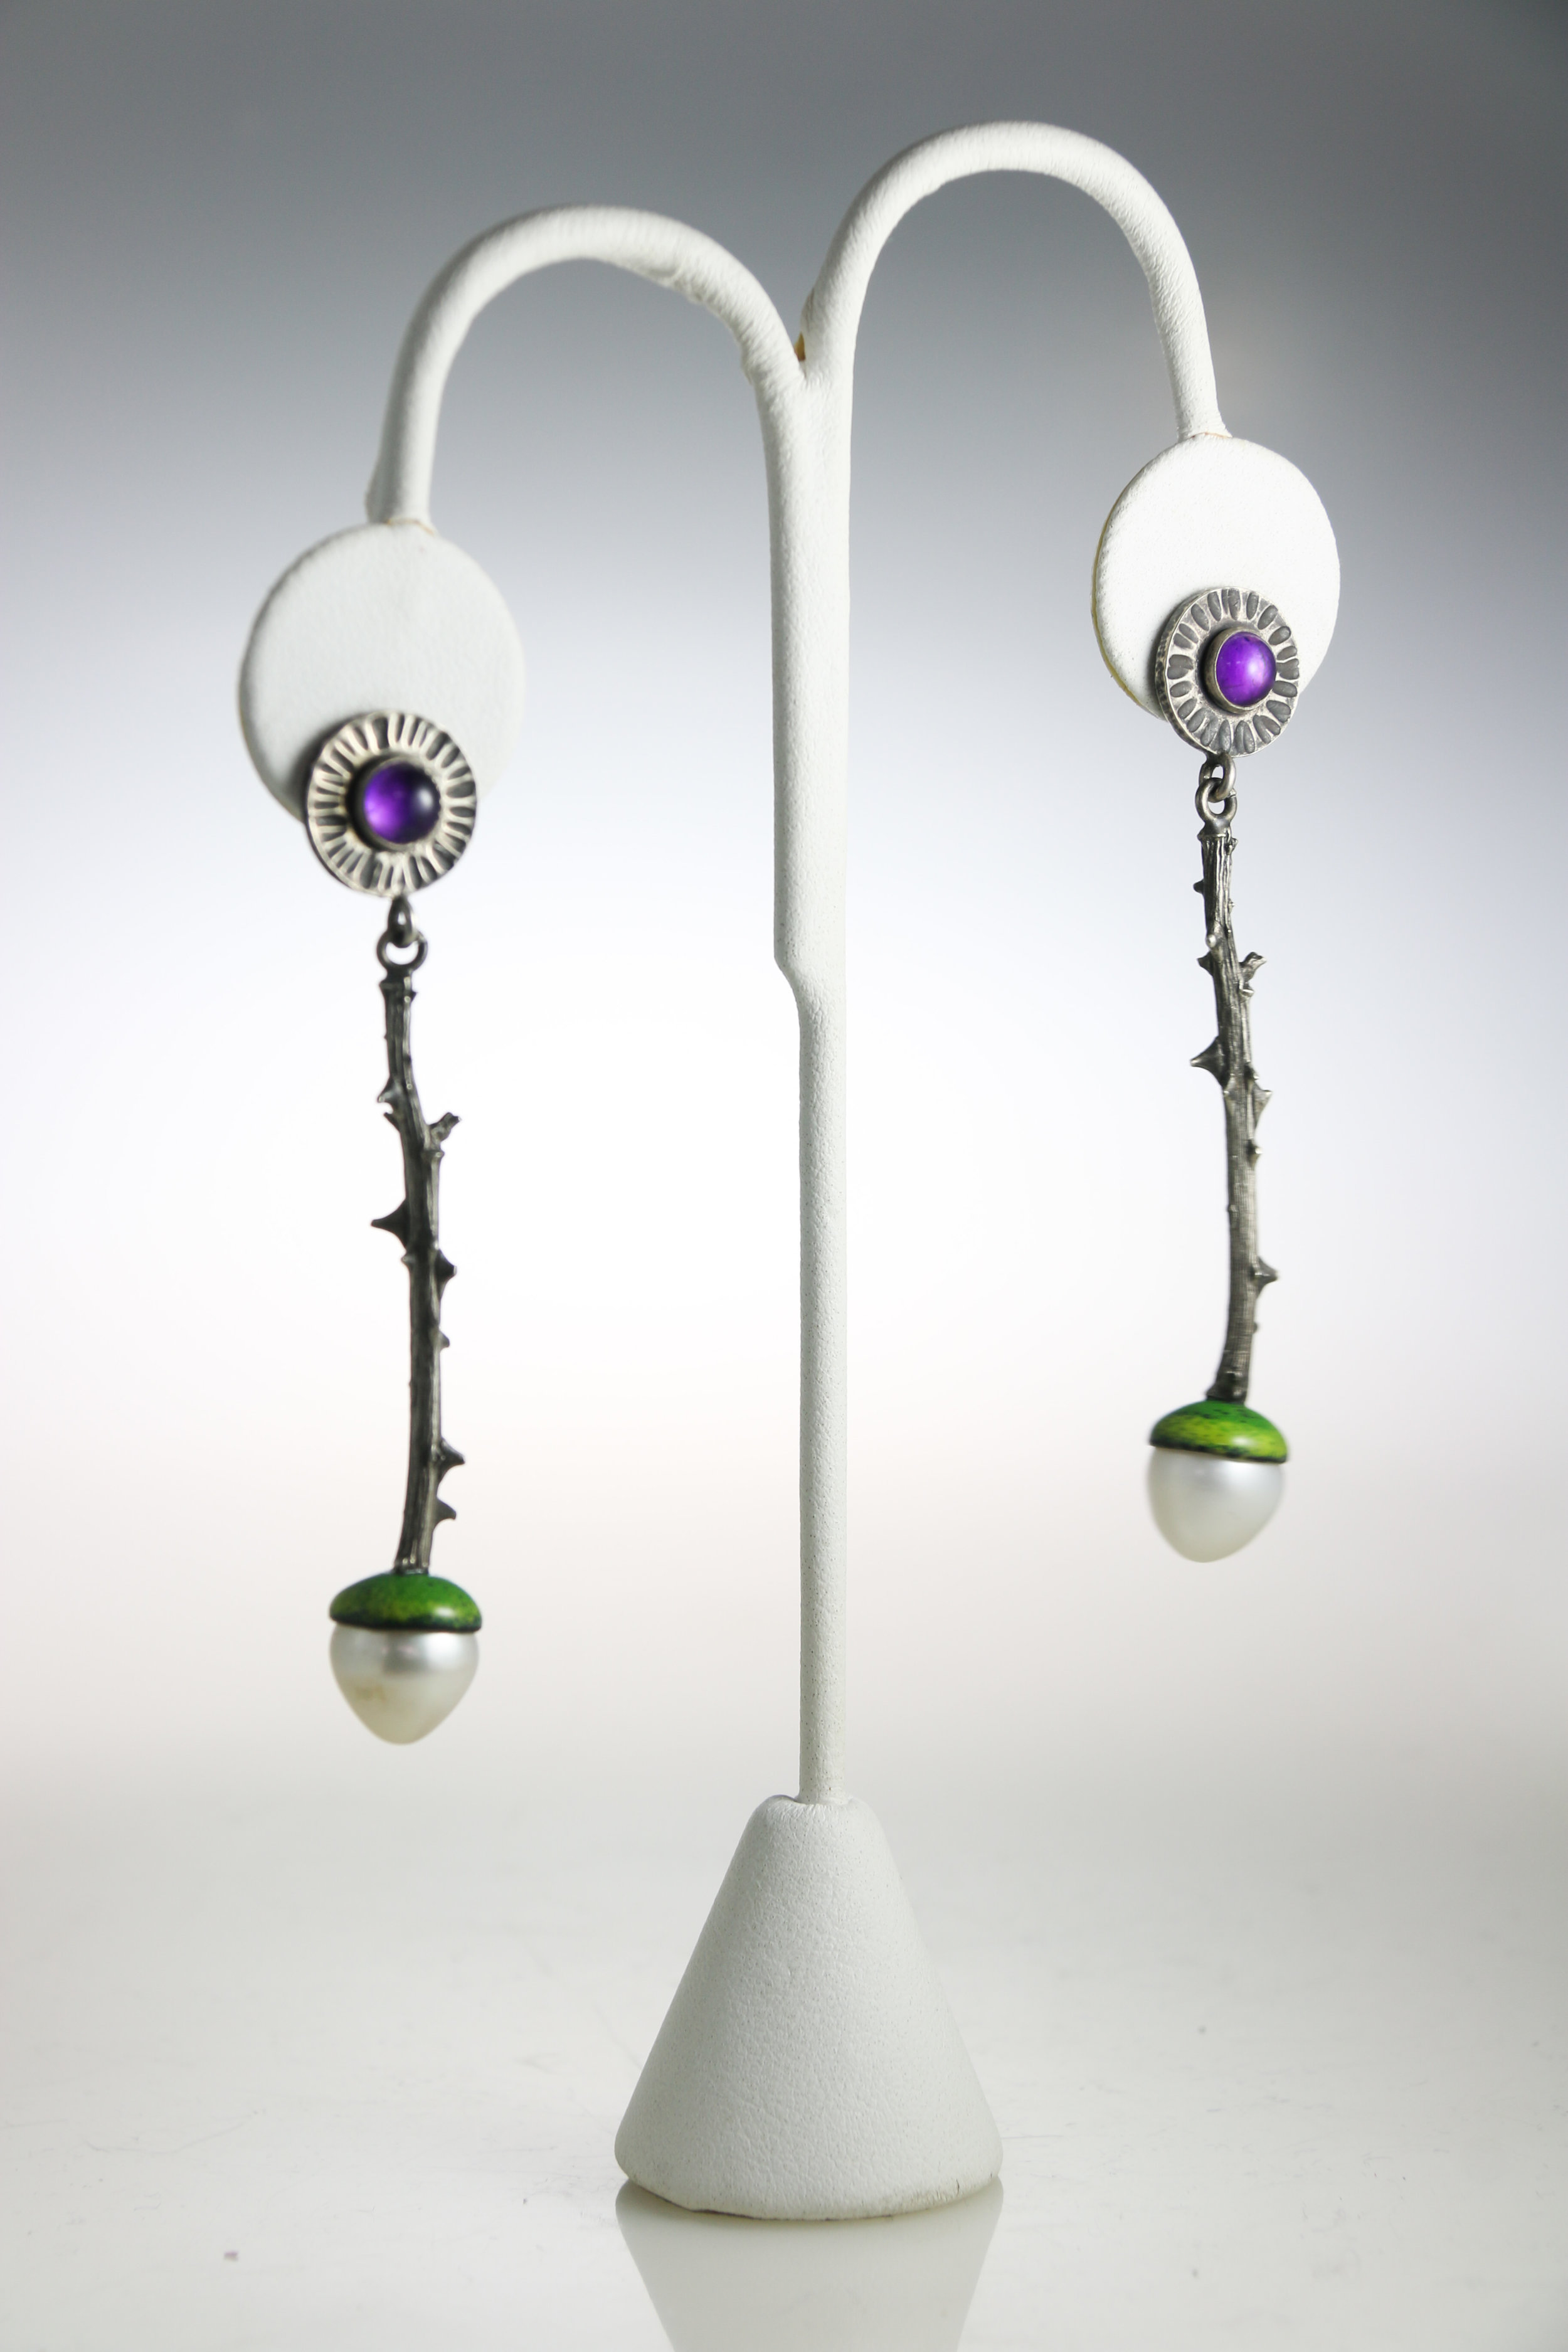   Earrings   sterling silver, pearls, enamel, gemstones  1.75” x .51” x .45”  other variations available 